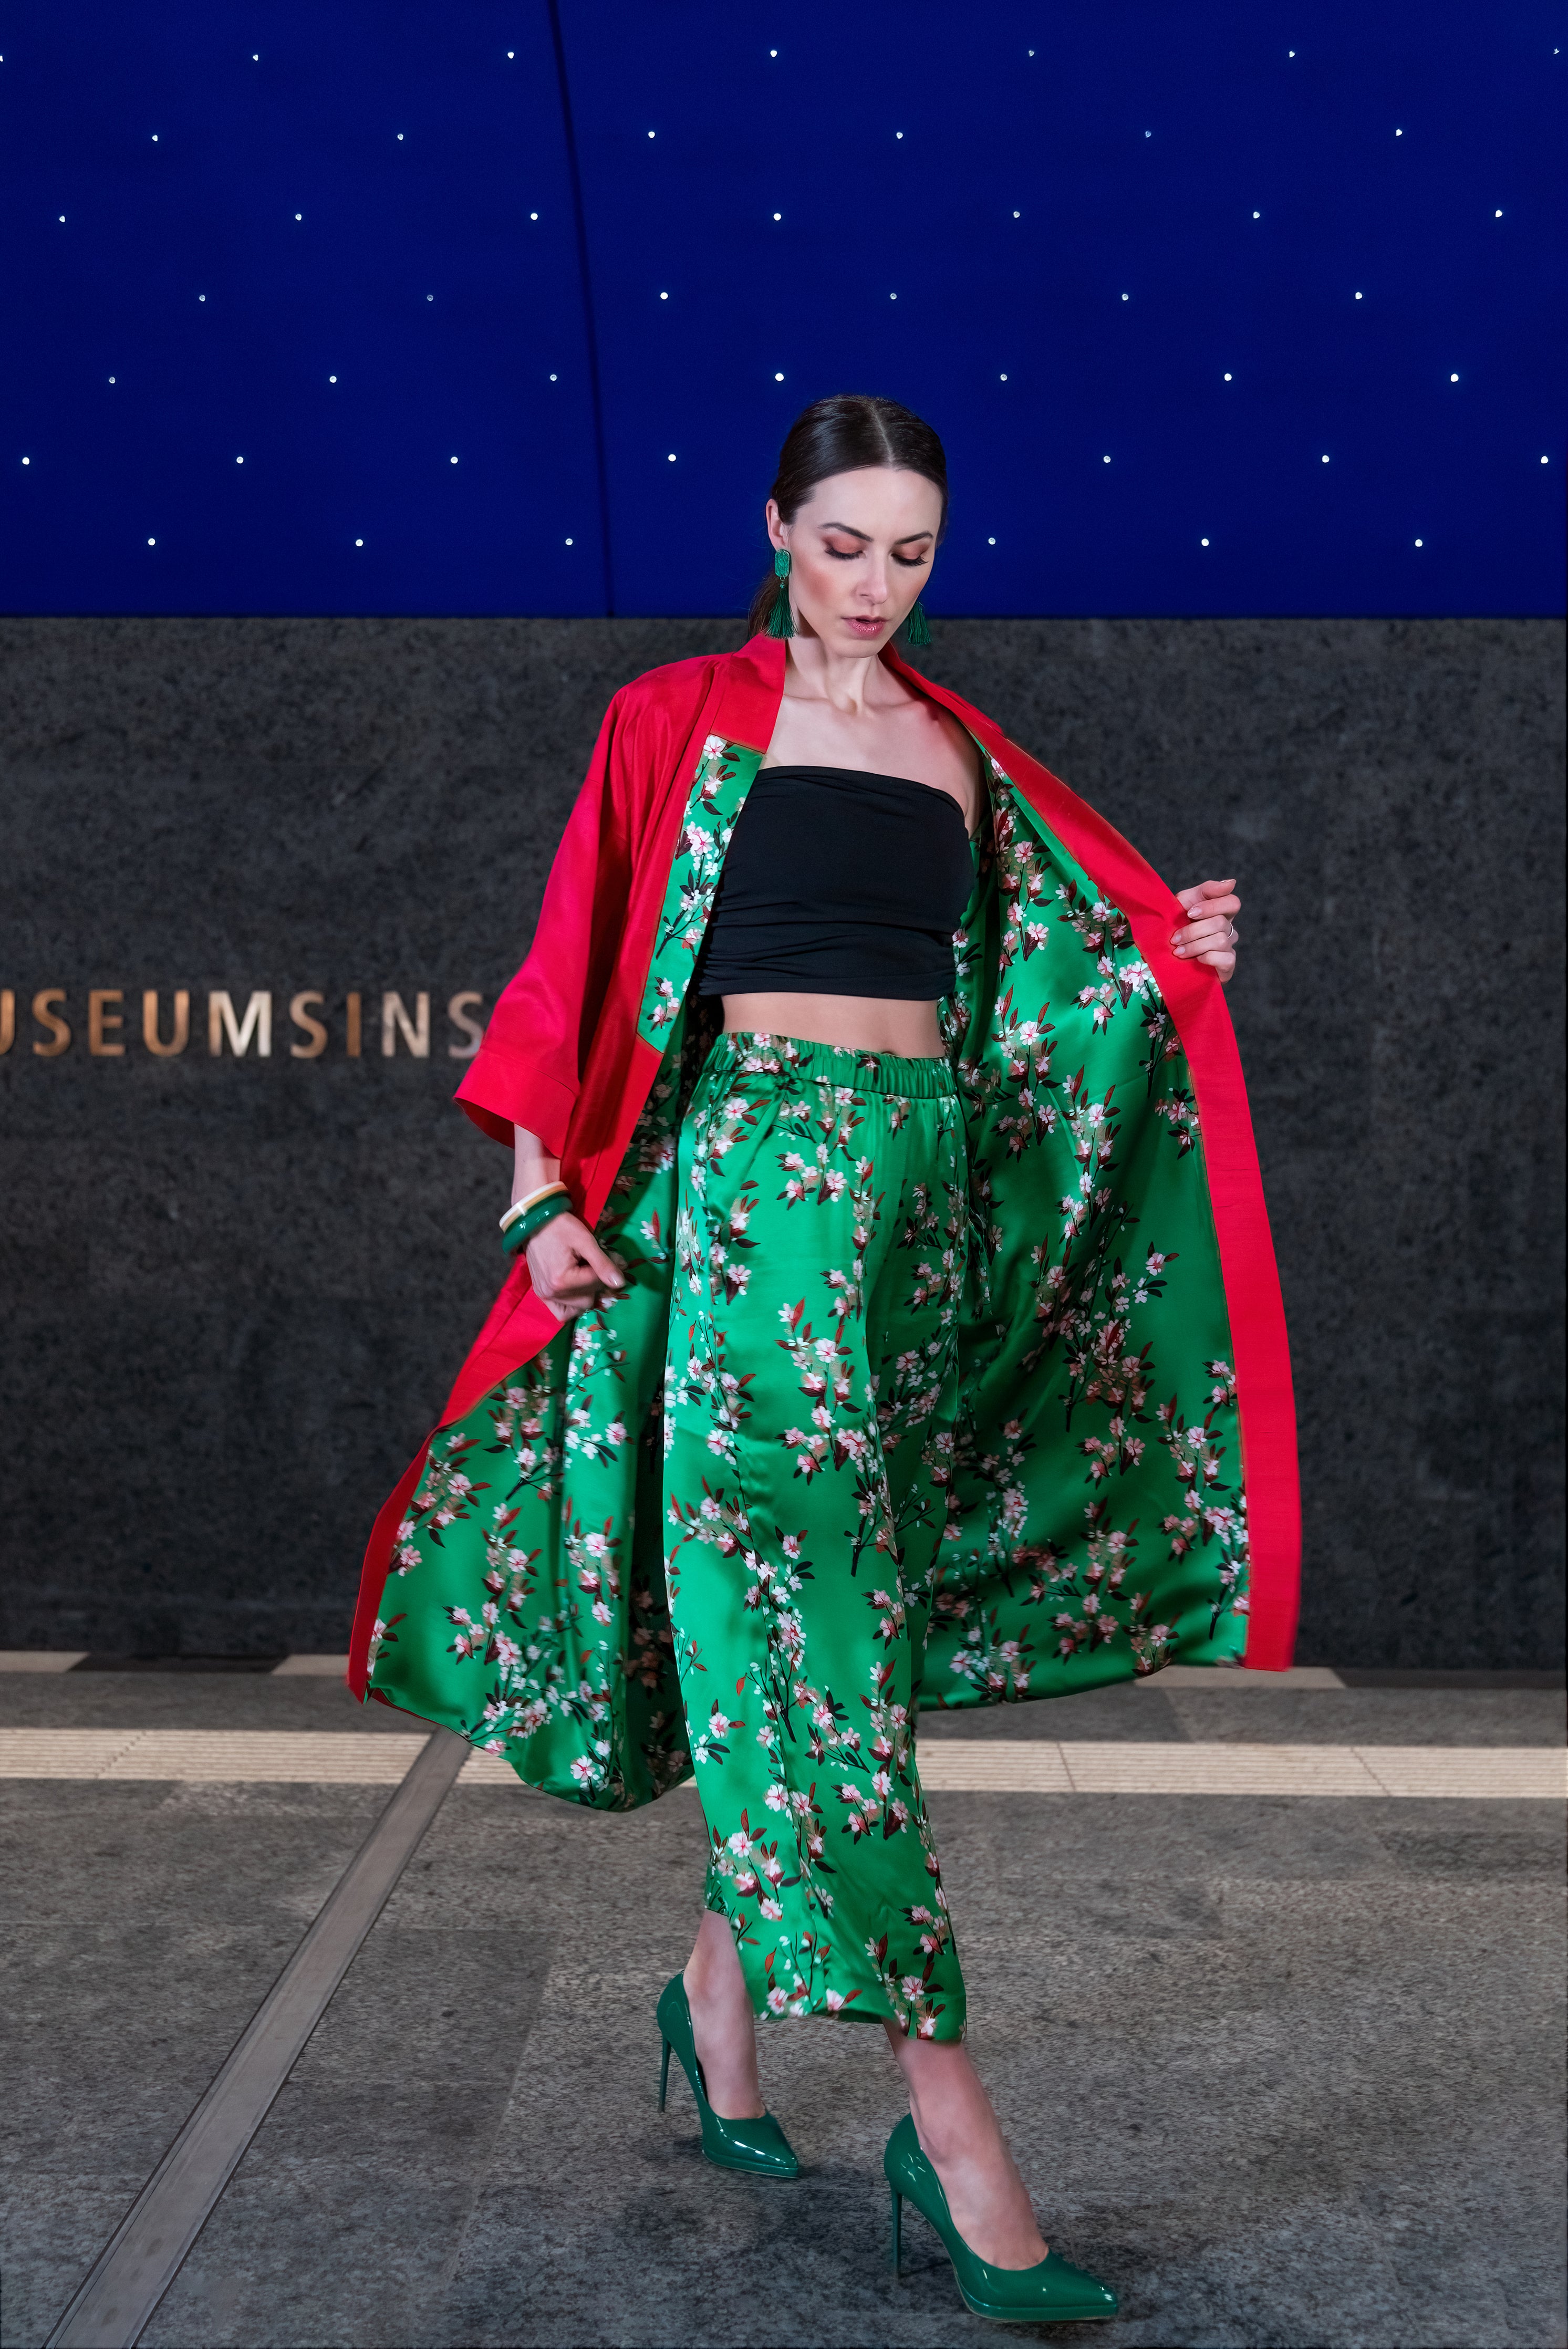 A model walking in the Cherry Blossom Kimono, with the red lining now on the outside, revealing the green fabric underneath as she walks.